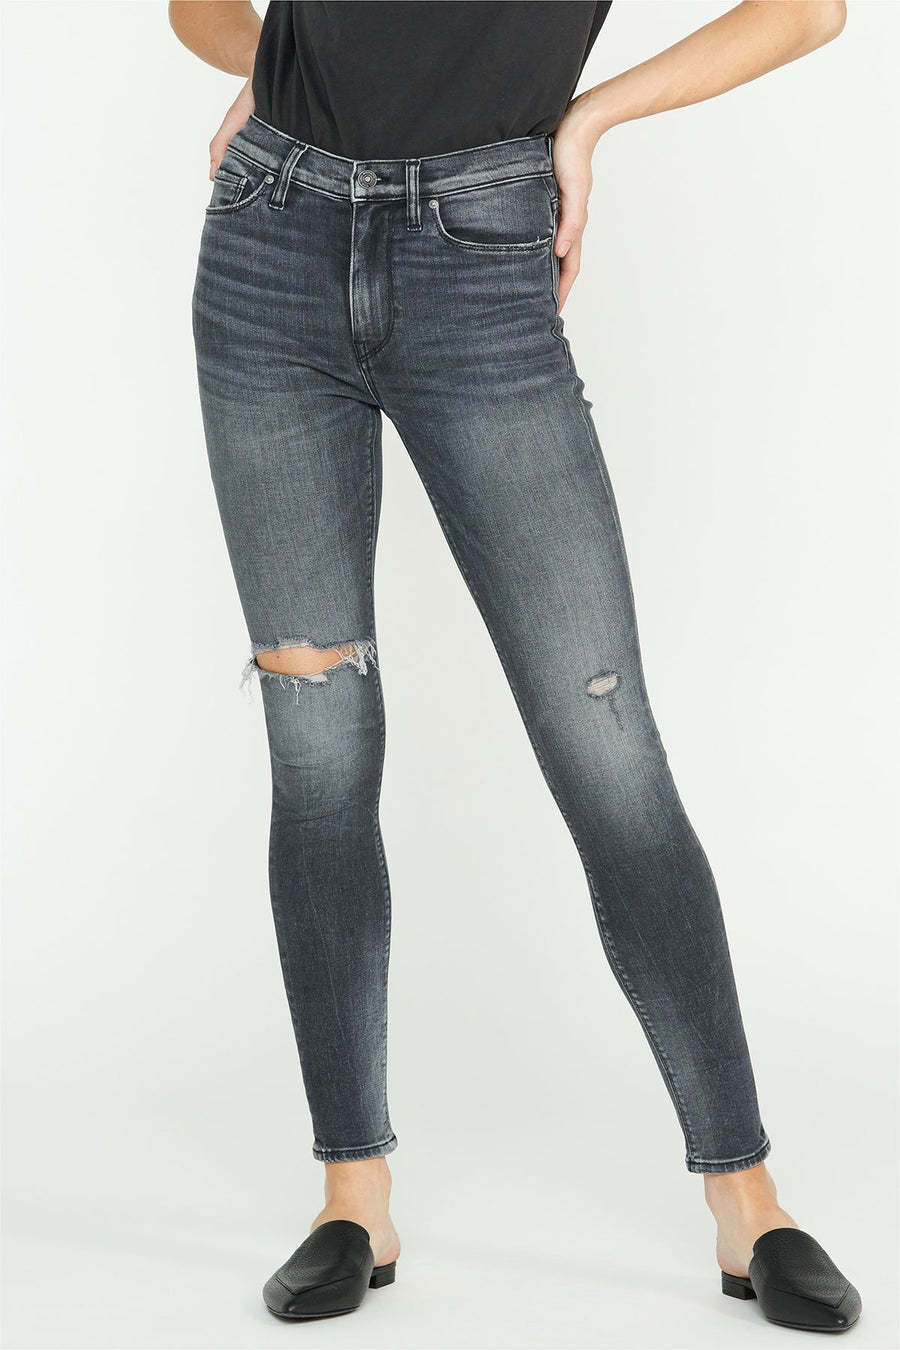 HUDSON JEANS Barbara High Rise in Out of Sight